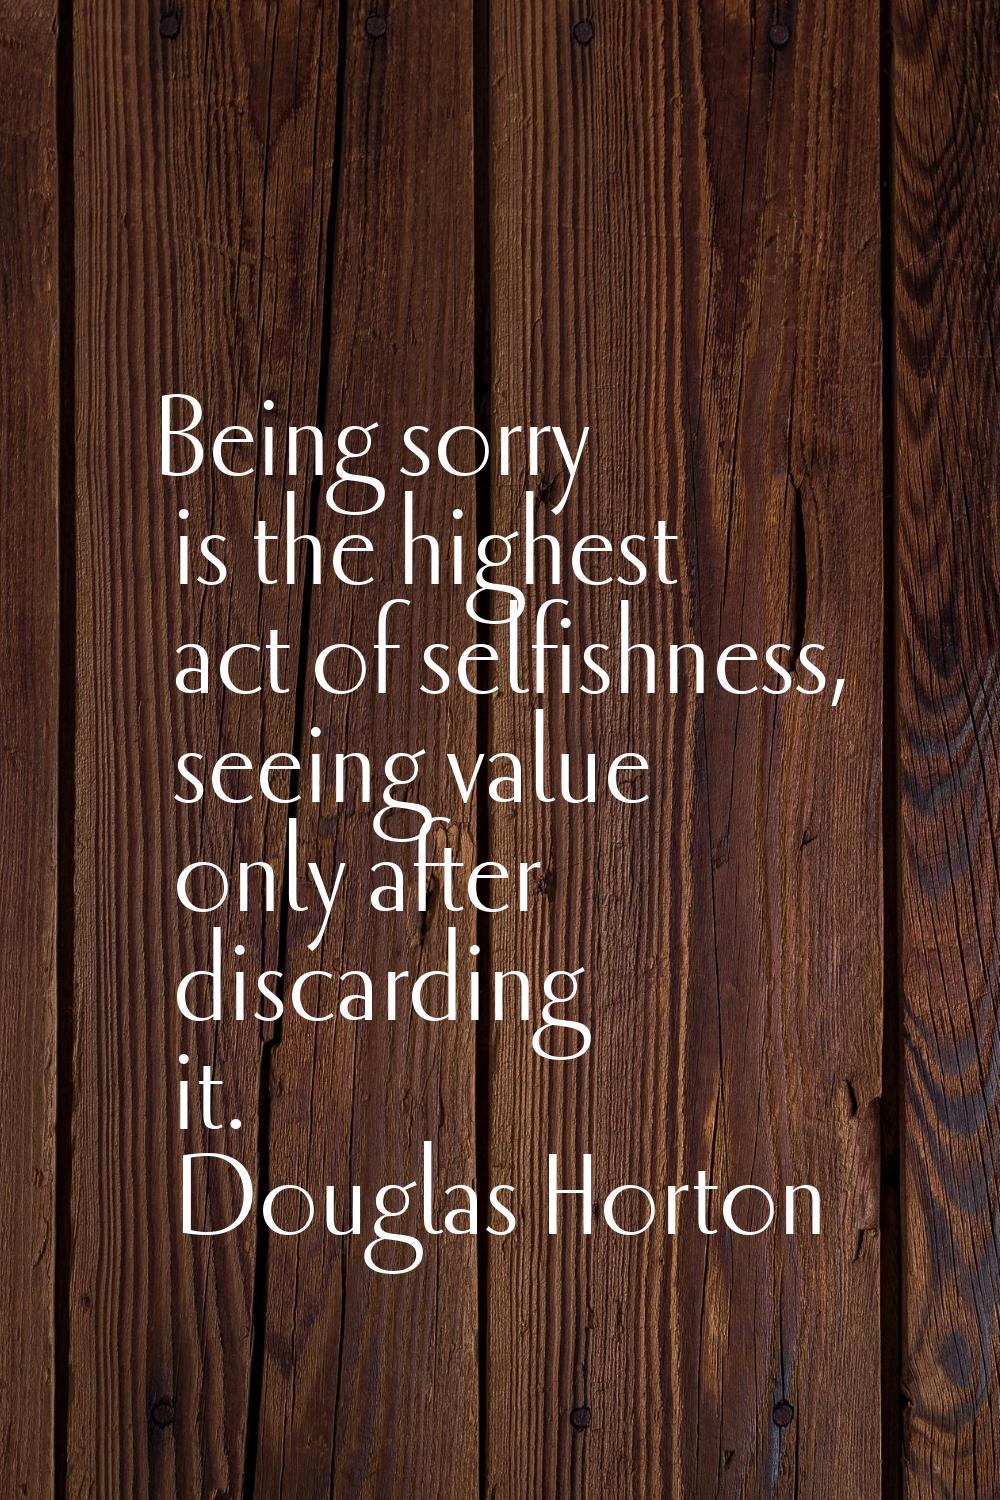 Being sorry is the highest act of selfishness, seeing value only after discarding it.